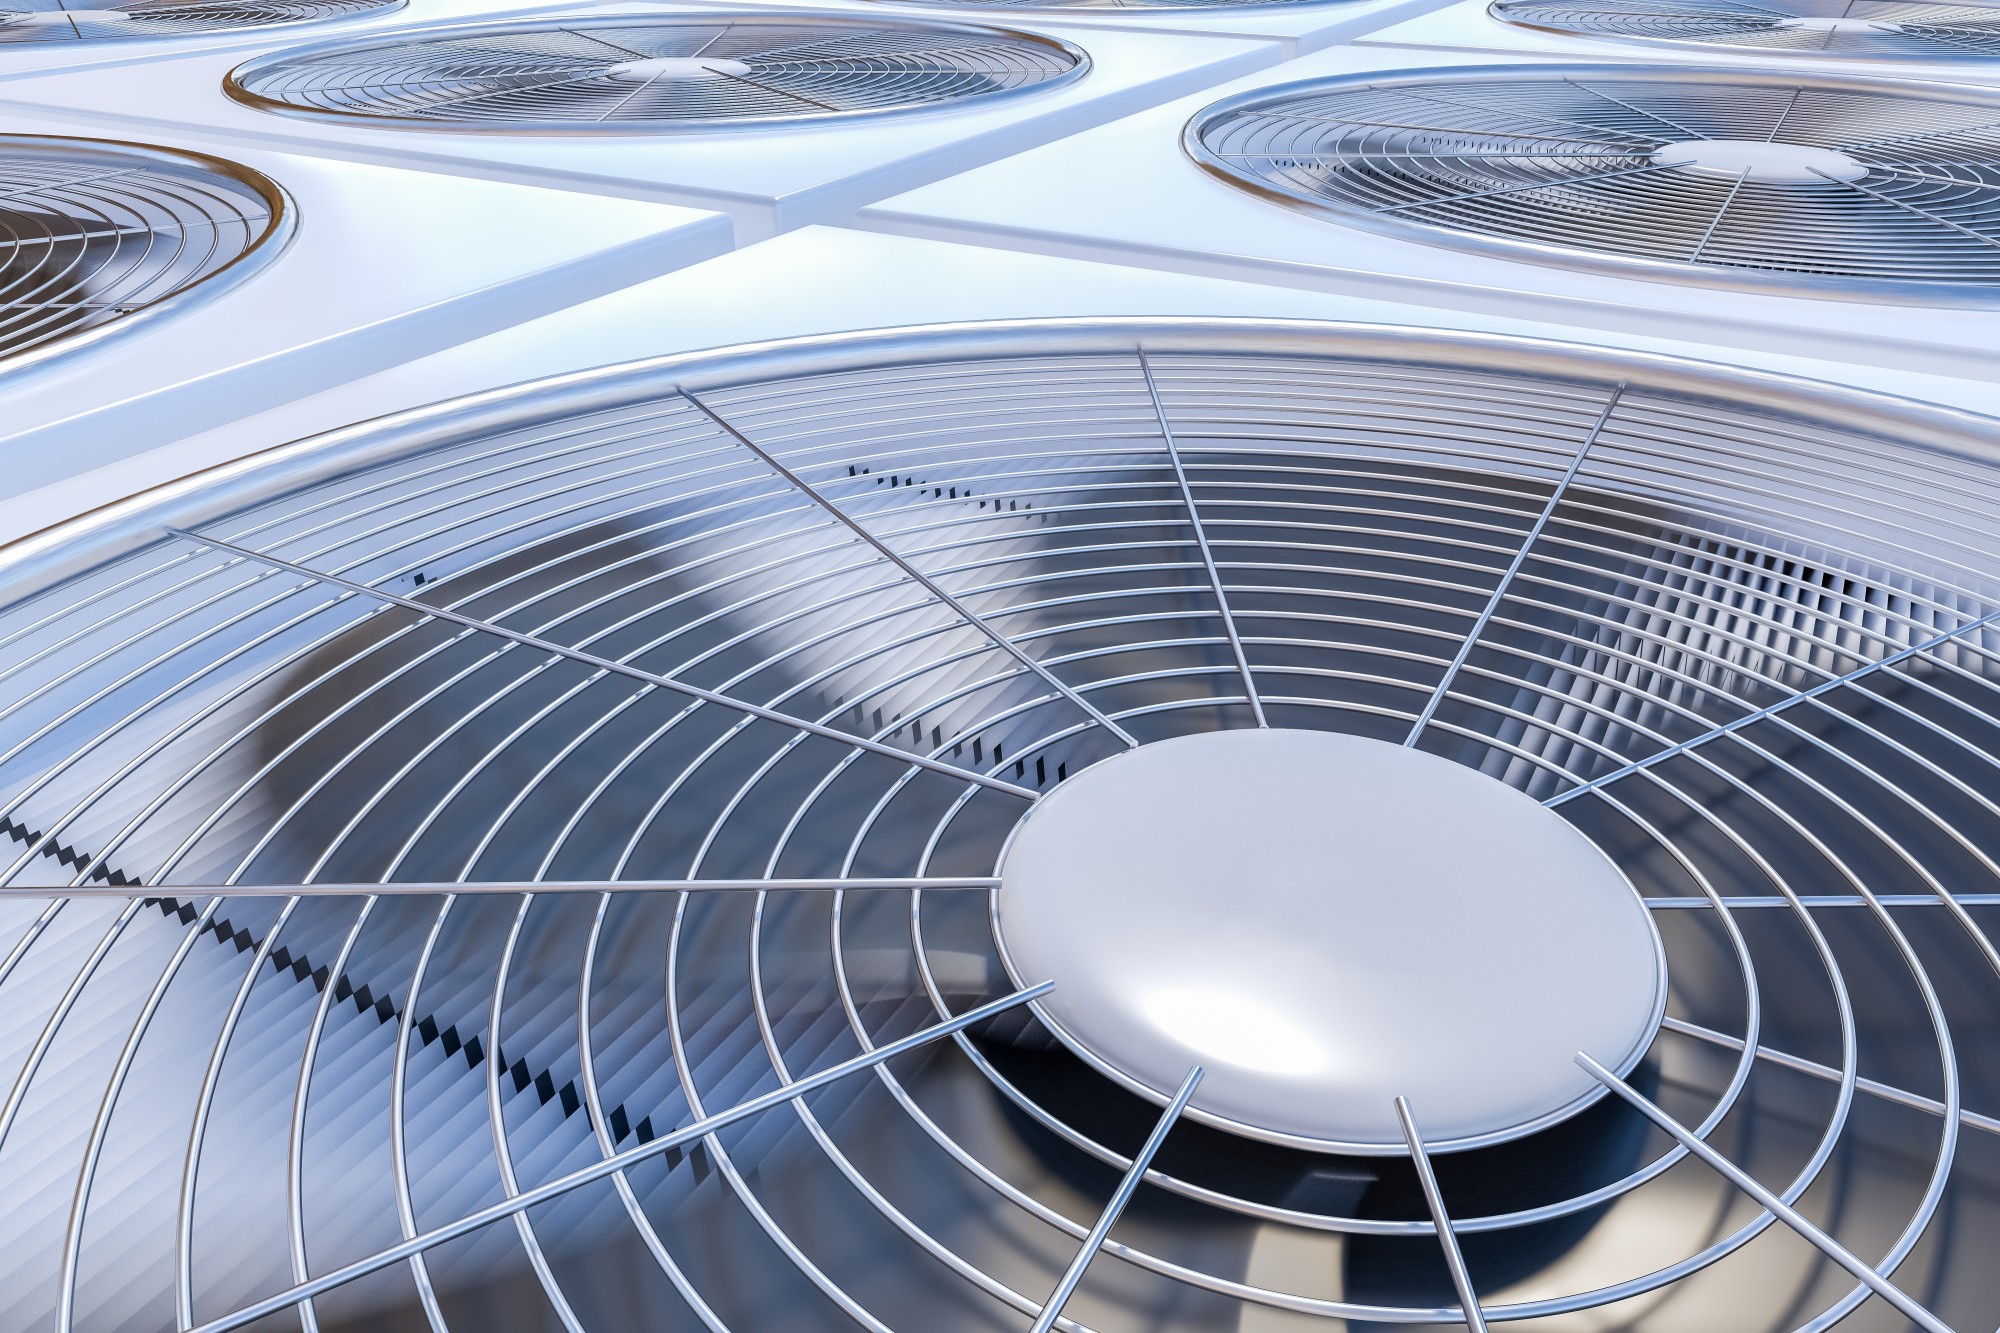 A Definitive Guide to the Types of Commercial HVAC Systems In Use Today